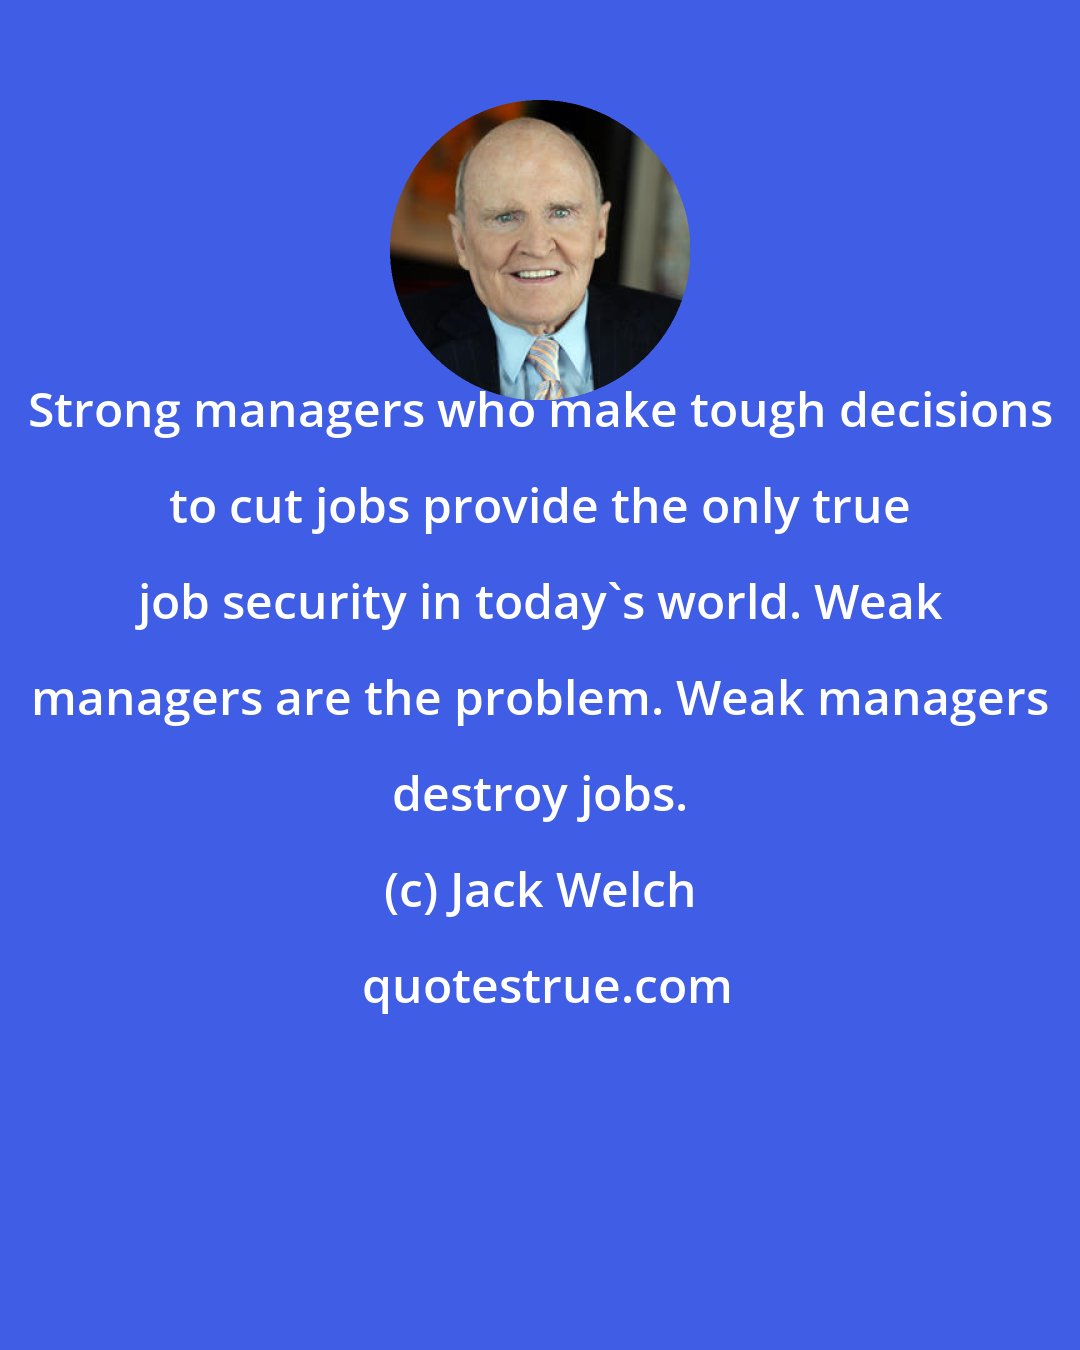 Jack Welch: Strong managers who make tough decisions to cut jobs provide the only true job security in today's world. Weak managers are the problem. Weak managers destroy jobs.